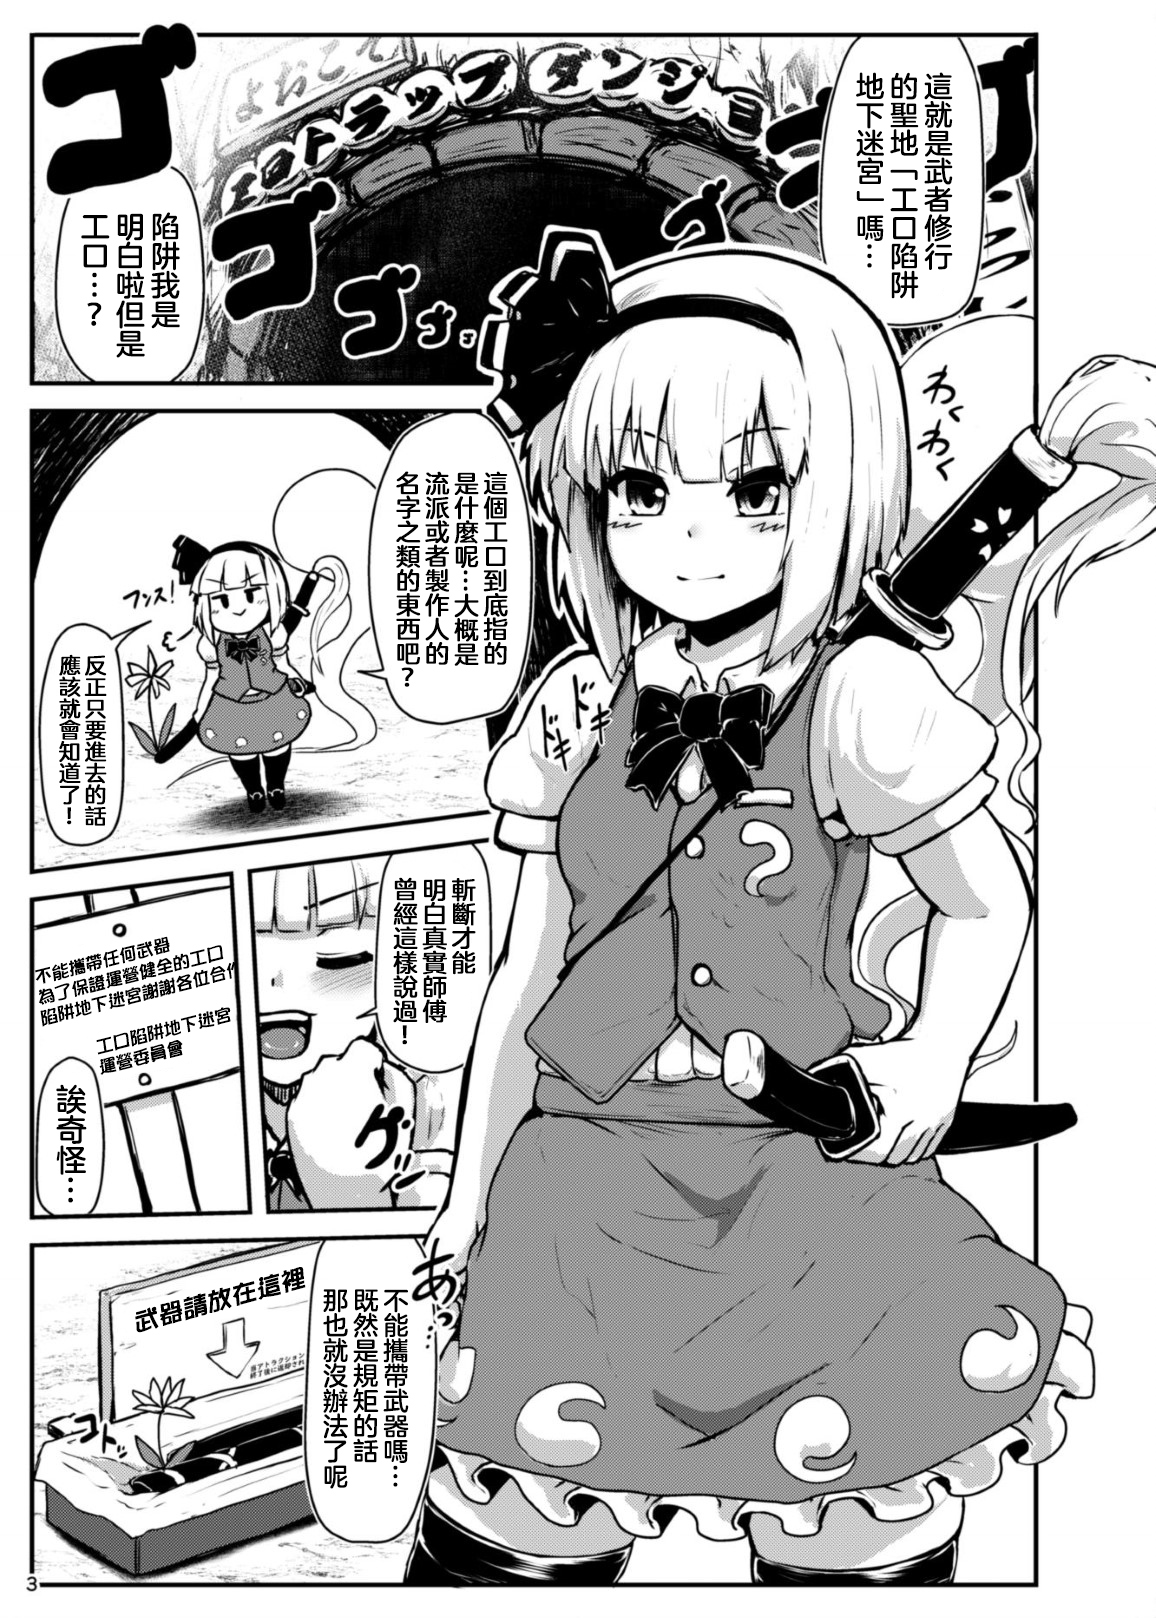 (C95) [Cheese Company (Peso)] Youmu in Ero Trap Dungeon (Touhou Project)  [Chinese] [沒有漢化] (C95) [チーズカンパニー (ペソ)] 妖夢インエロトラップダンジョン (東方Project)  [中国翻訳]